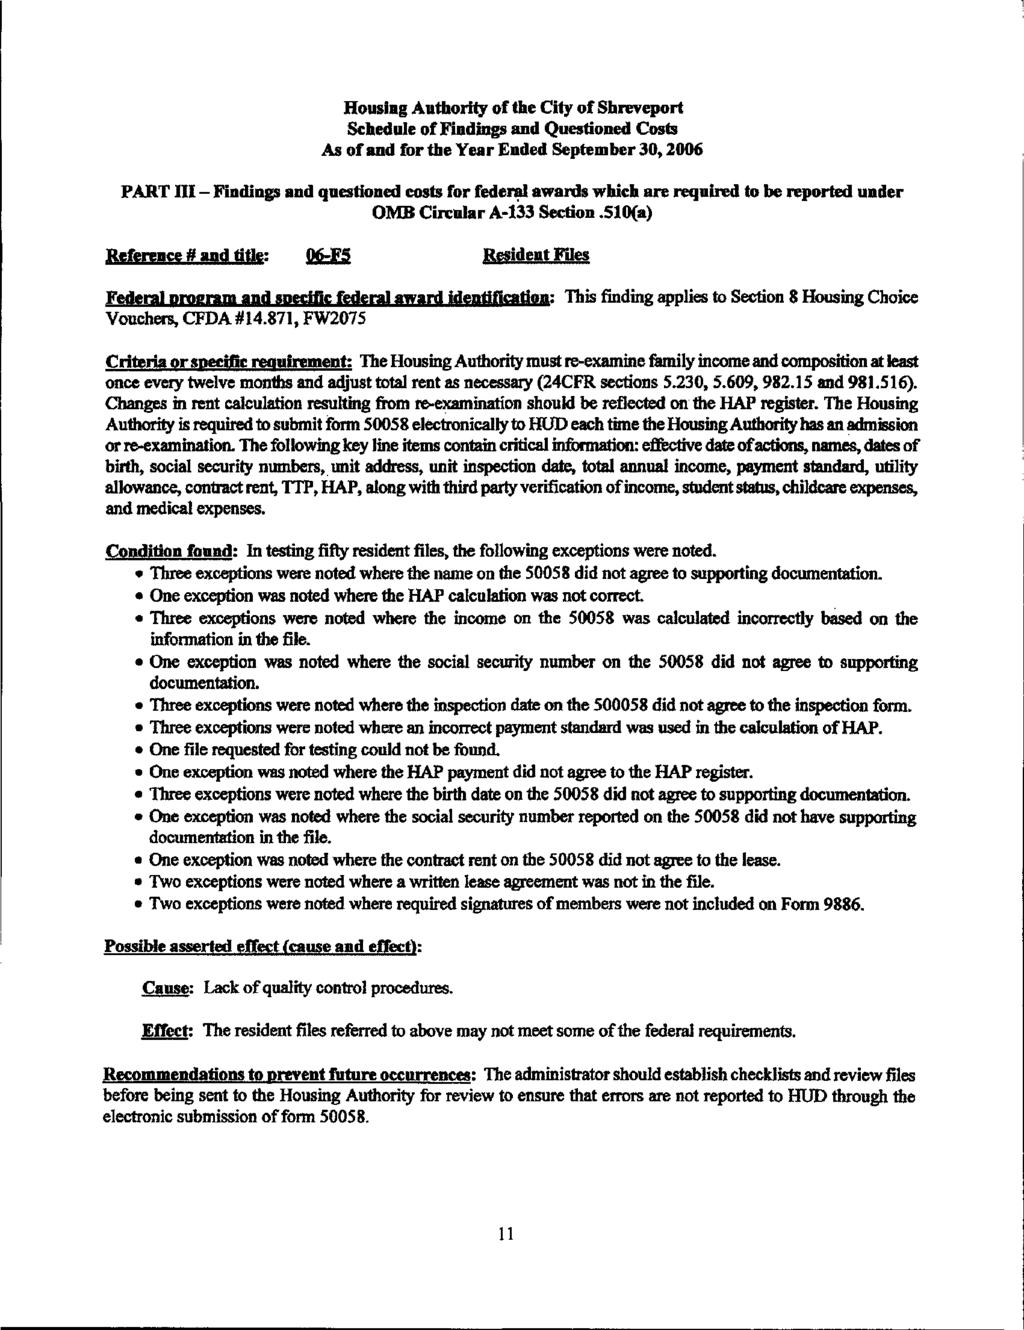 Housing Authority of the City of Shreveport Schedule of Findings and Questioned Costs As of and for the Year Ended September 3,26 PART III - Findings and questioned costs for federal awards which are